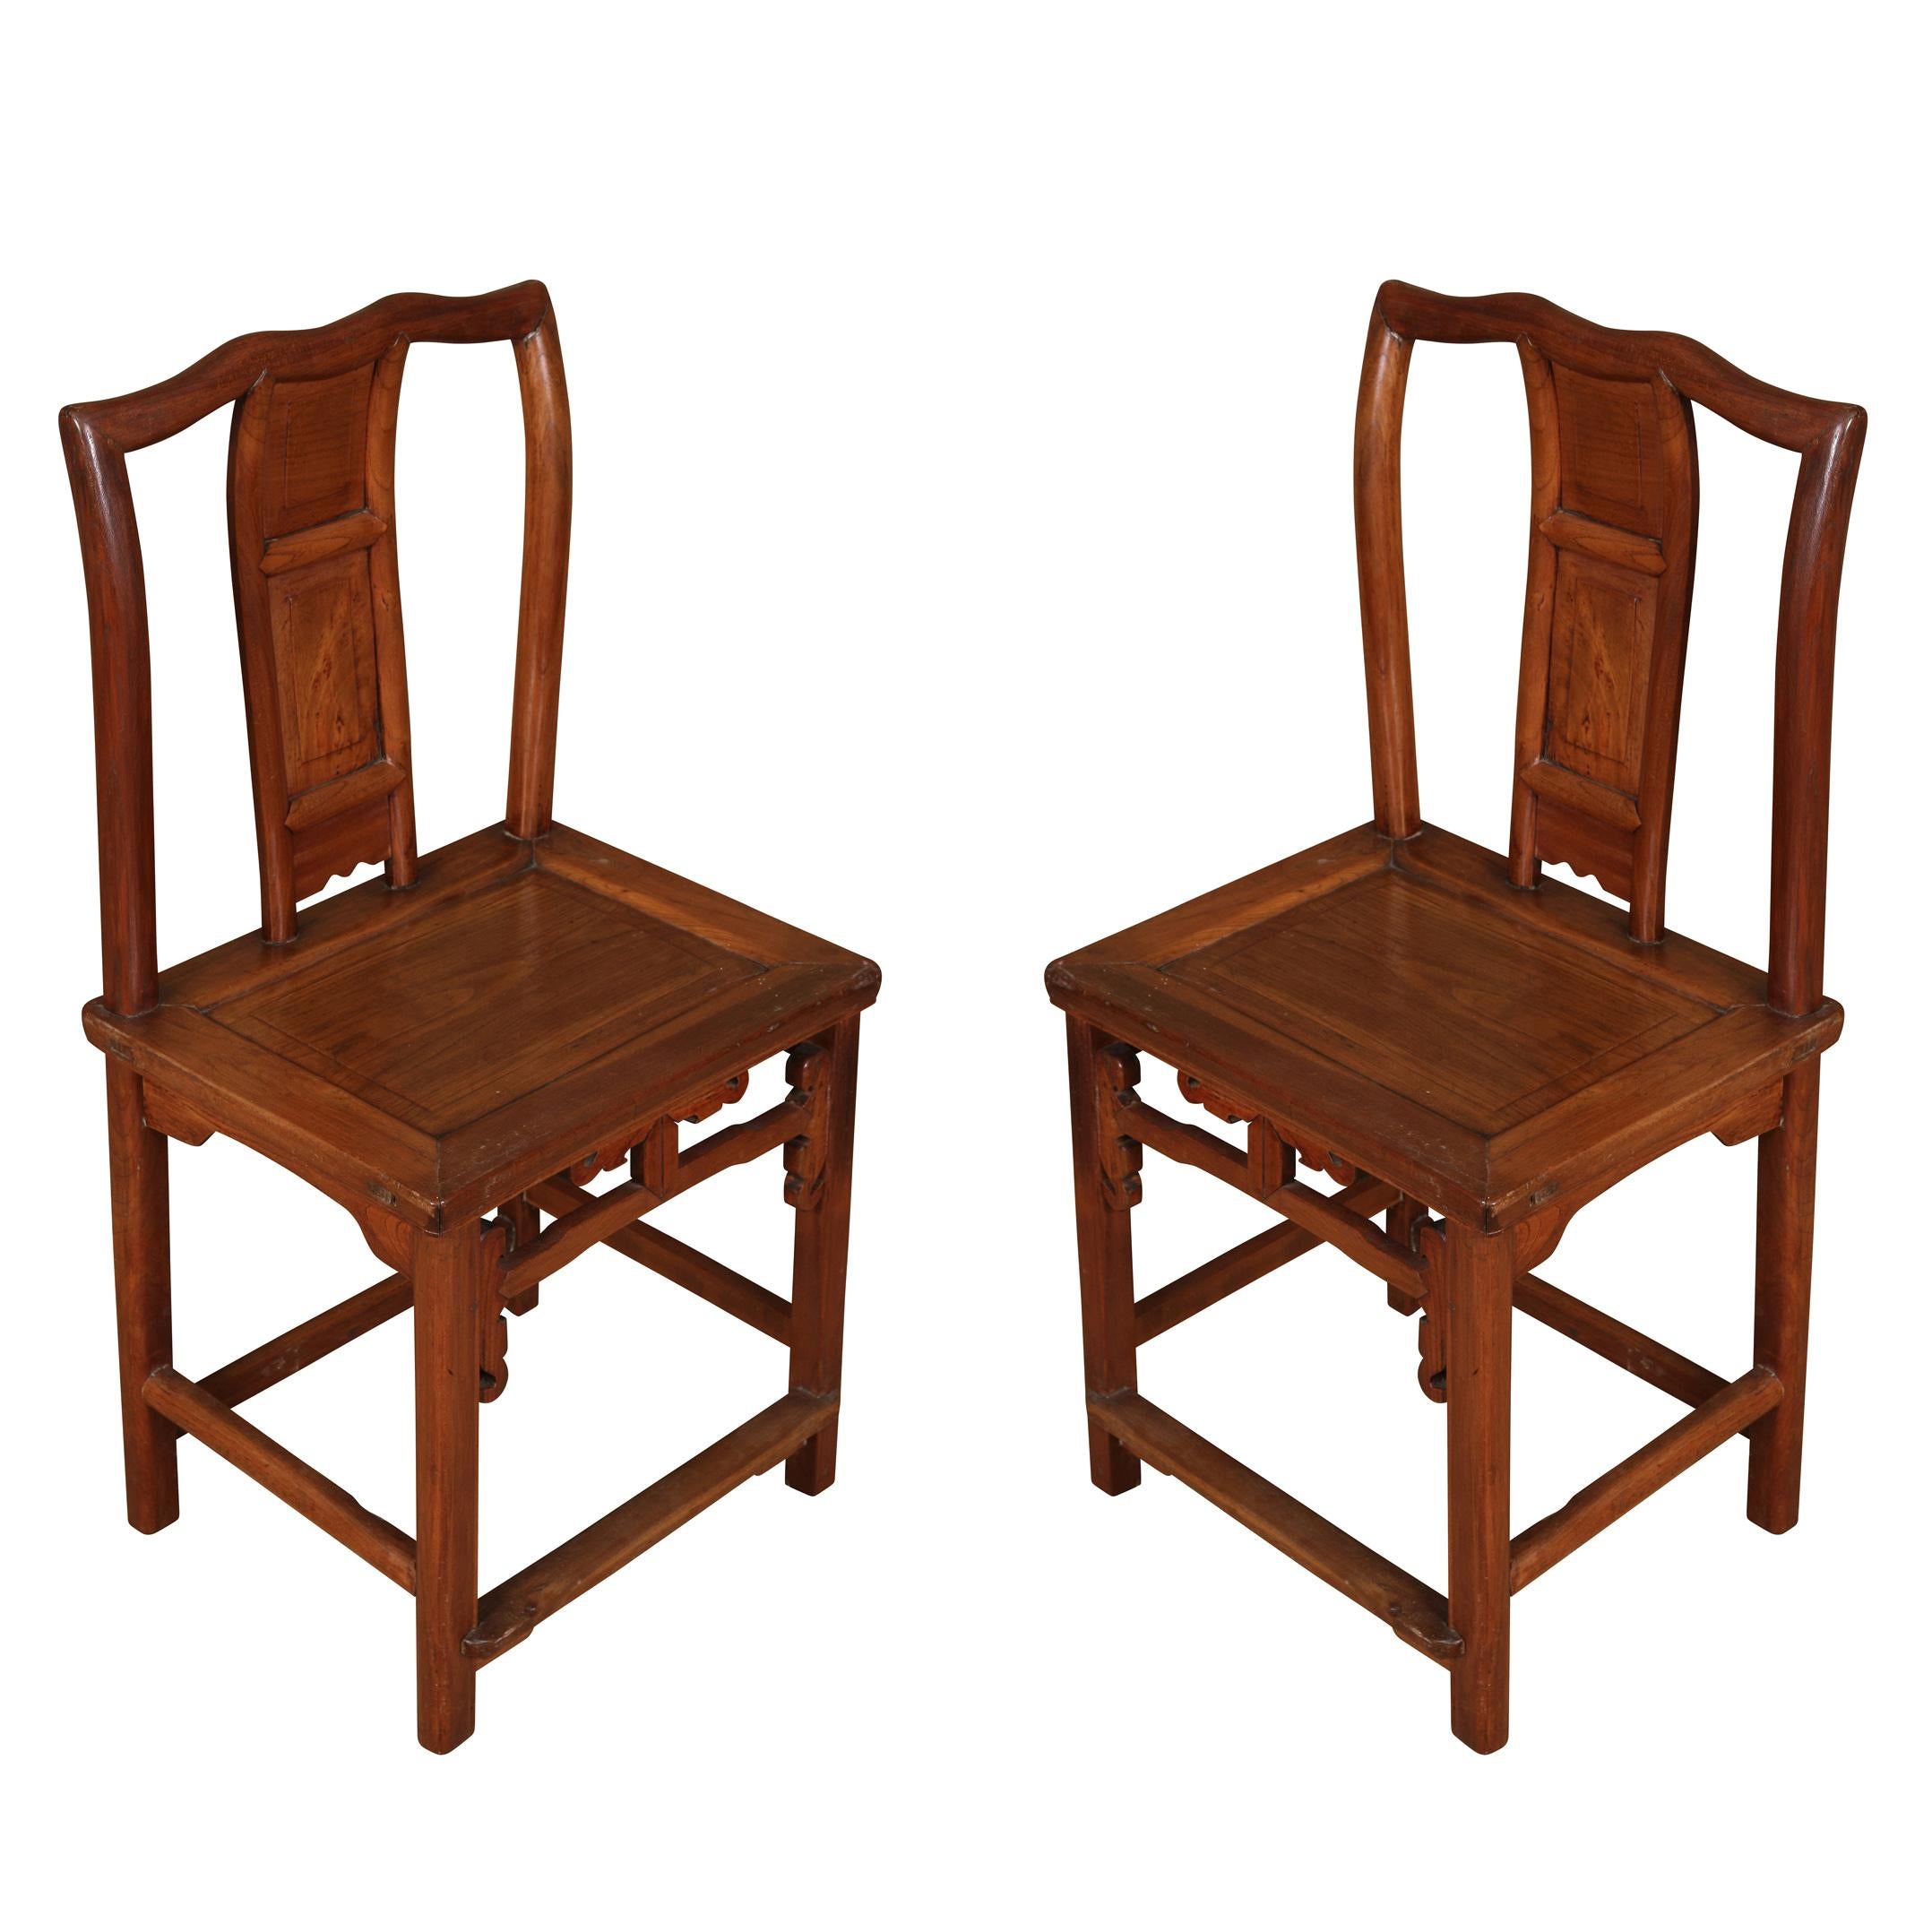 Pair of Asian Wood Chairs in with Carved Square Motif In Good Condition For Sale In Locust Valley, NY